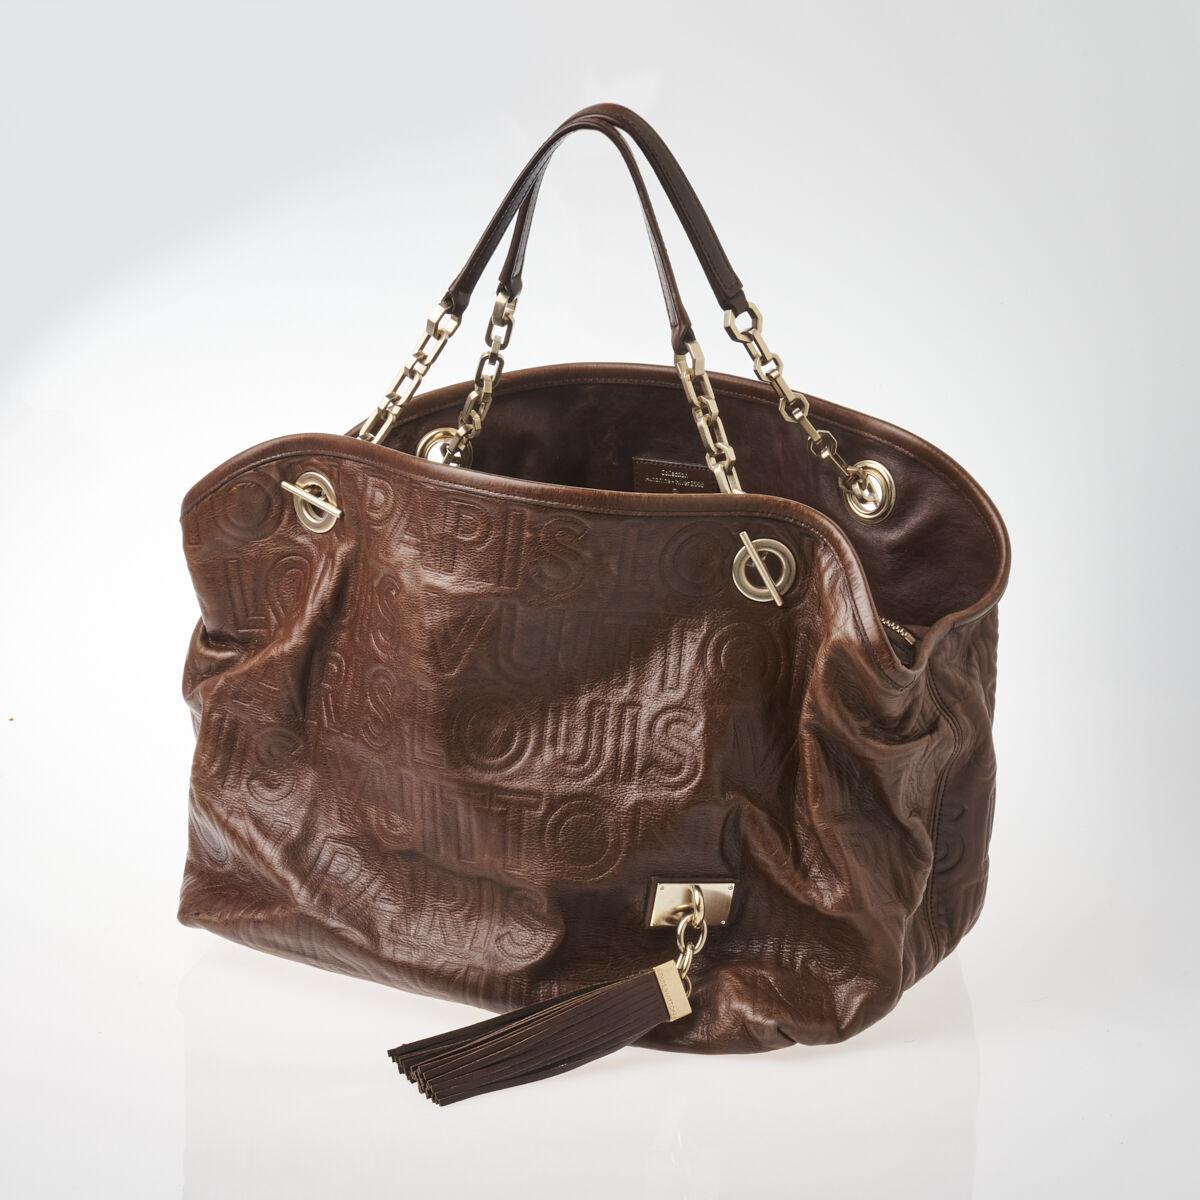 Sold at Auction: A Beautiful Limited Edition, 2008 Autumn/Winter  Collection, Louis Vuitton Paris Souple Whisper Tote